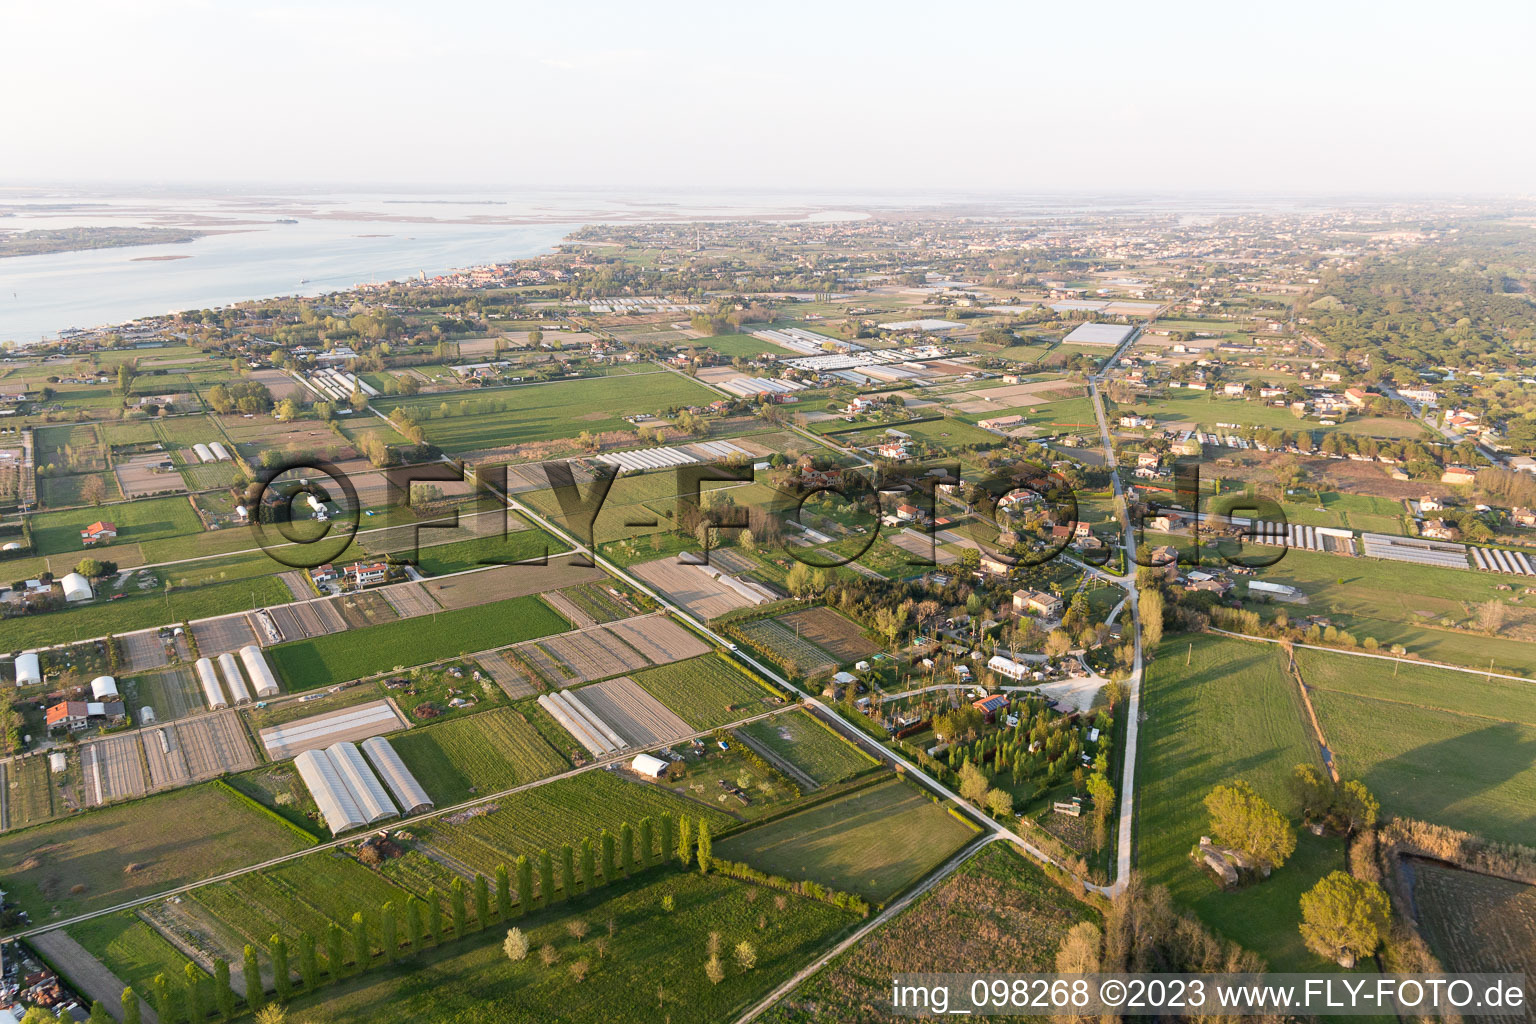 Aerial photograpy of Punta Sabbioni in the state Veneto, Italy